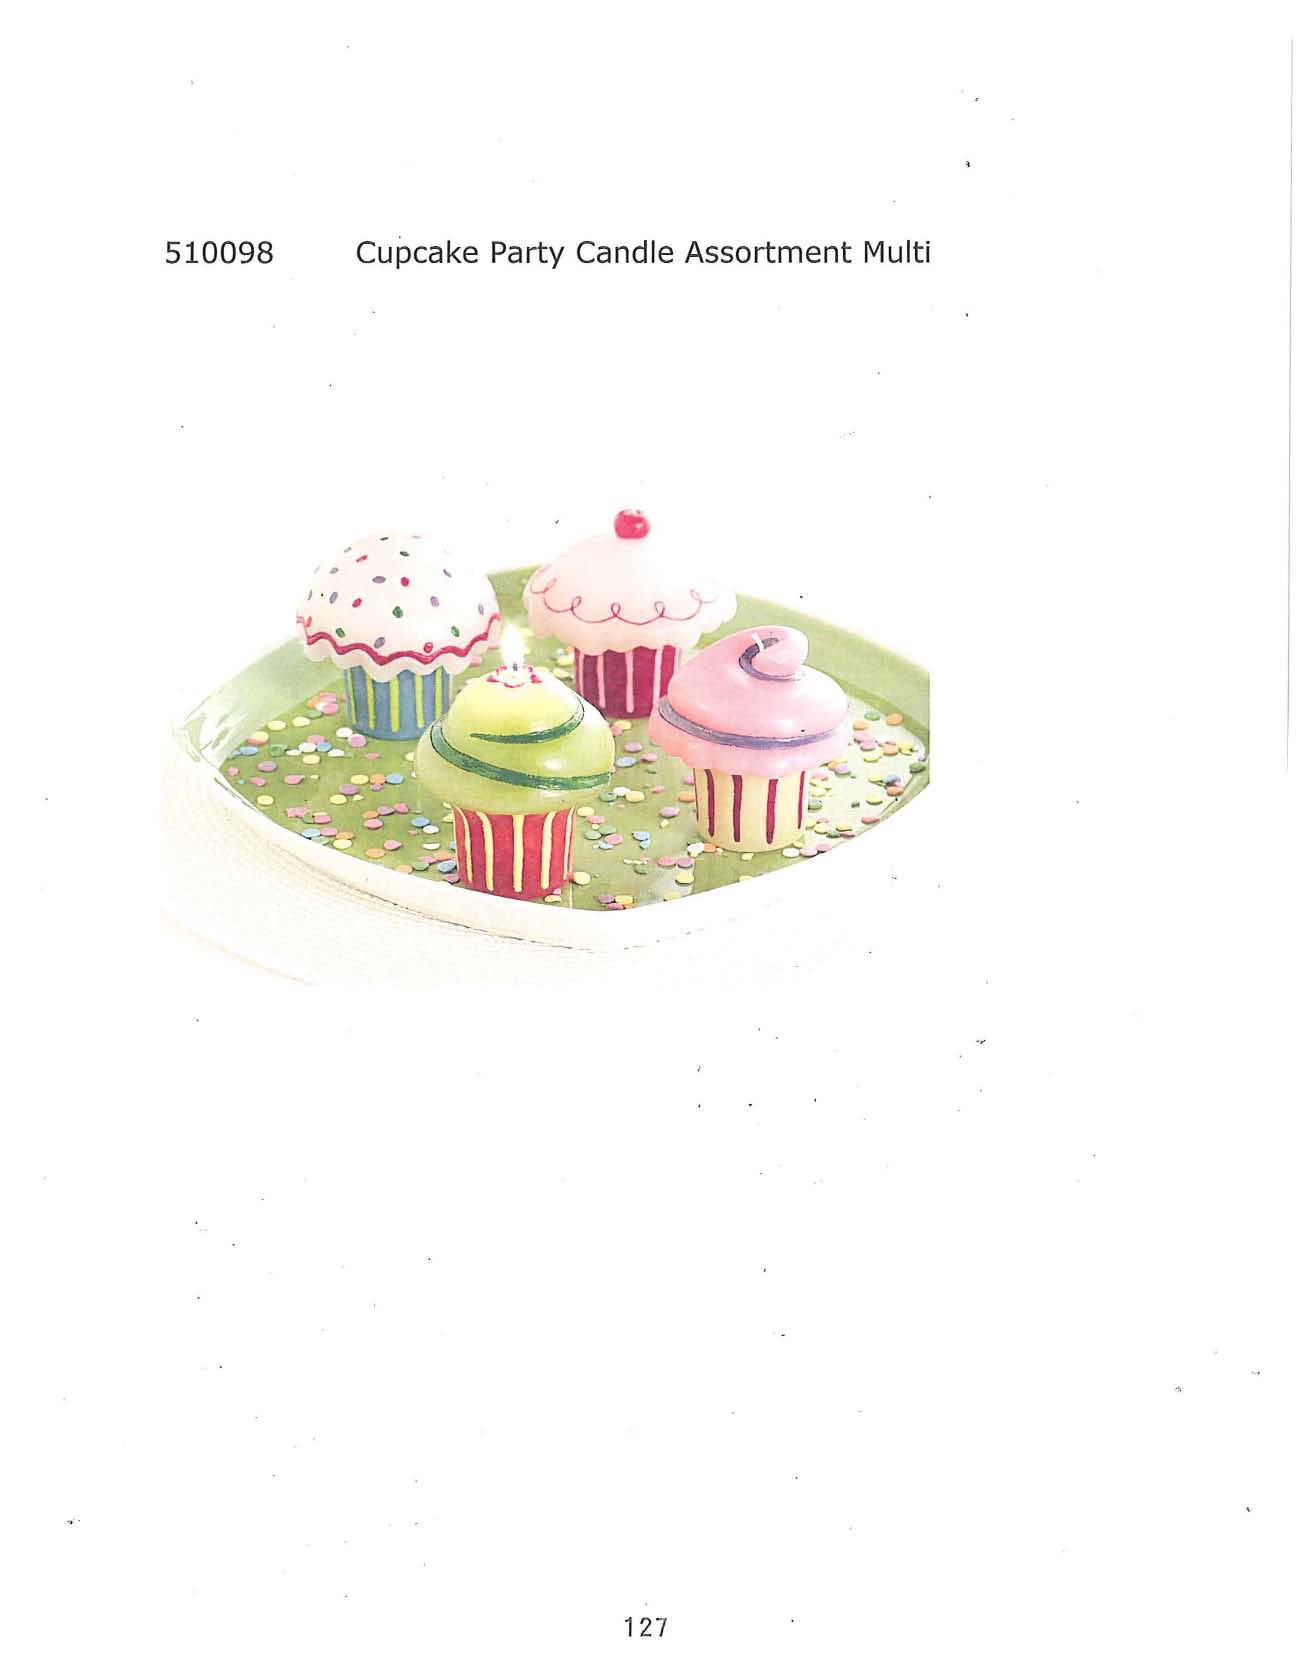 Cupcake Party Candle Assortment - Multi